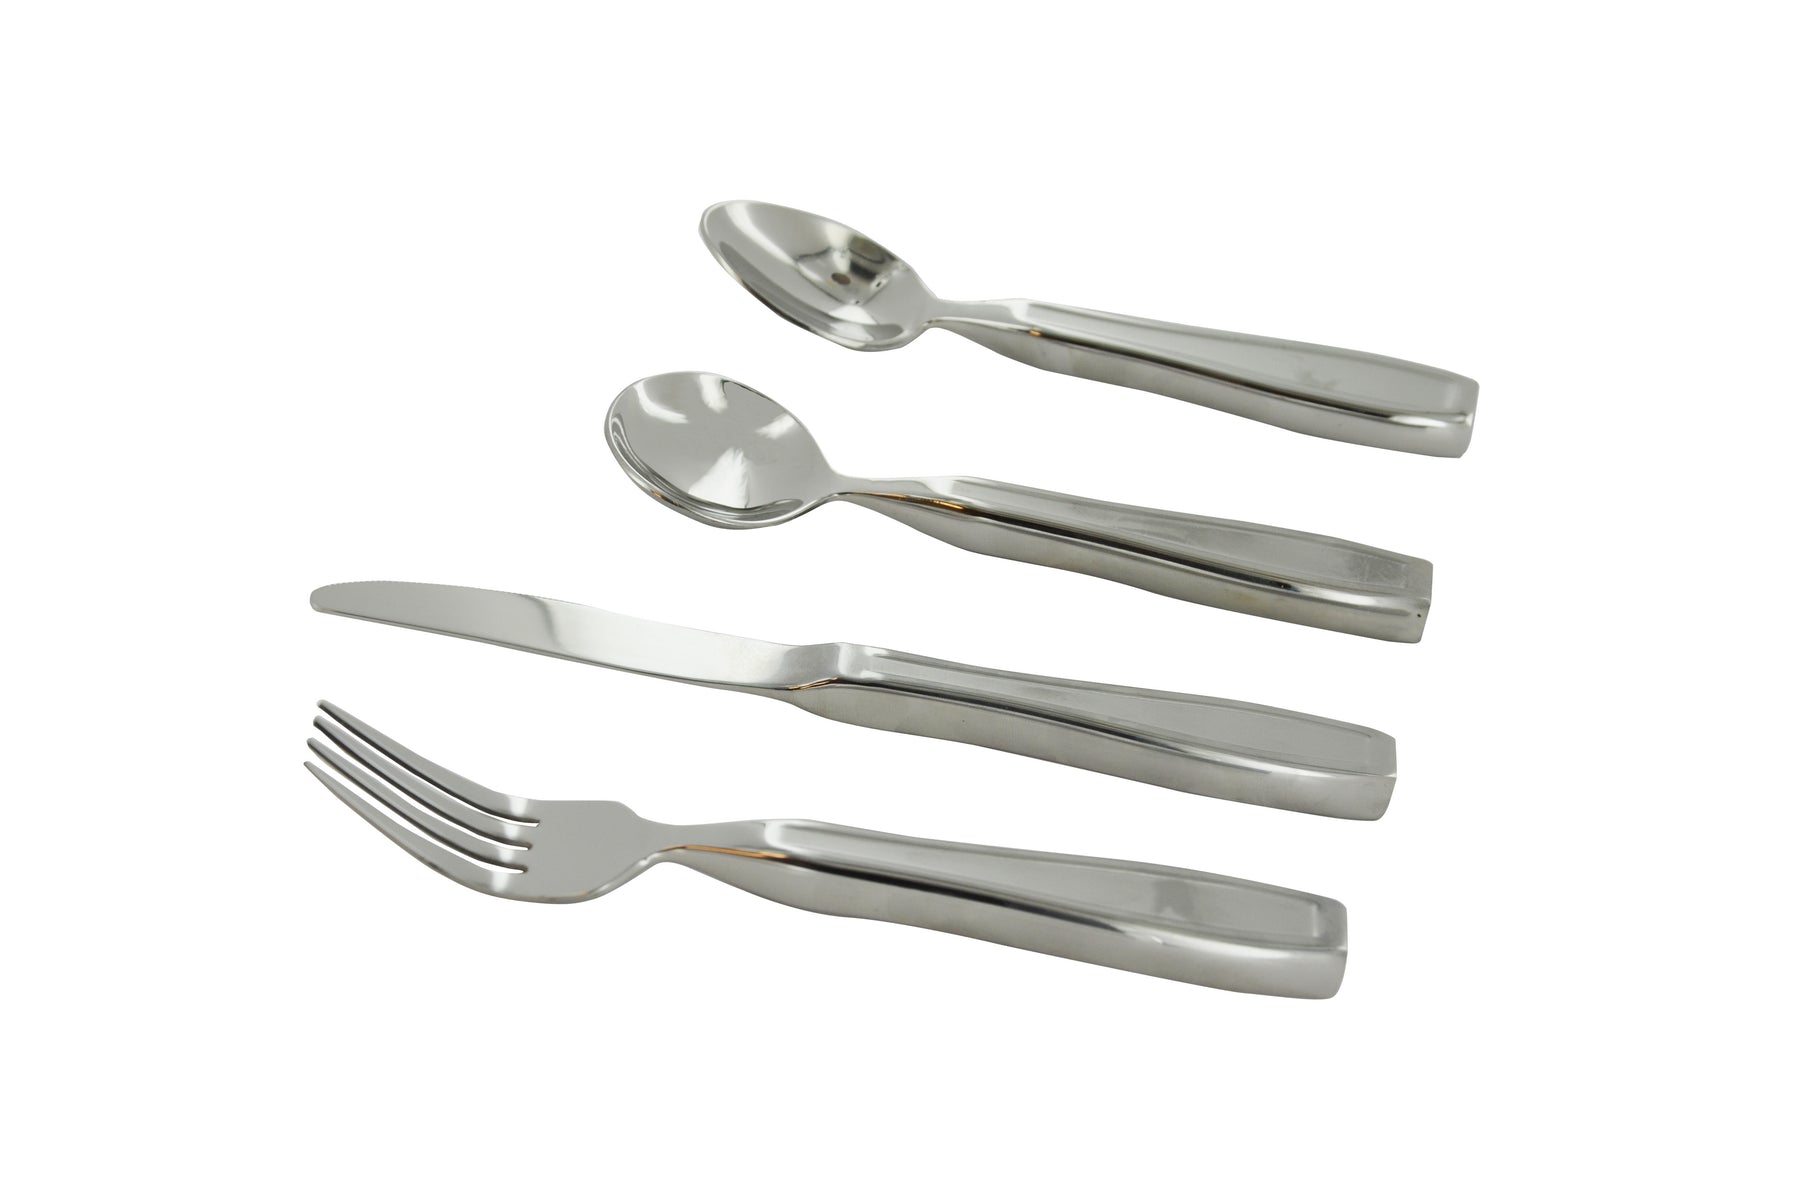 Weighted Utensils on white background all lined up